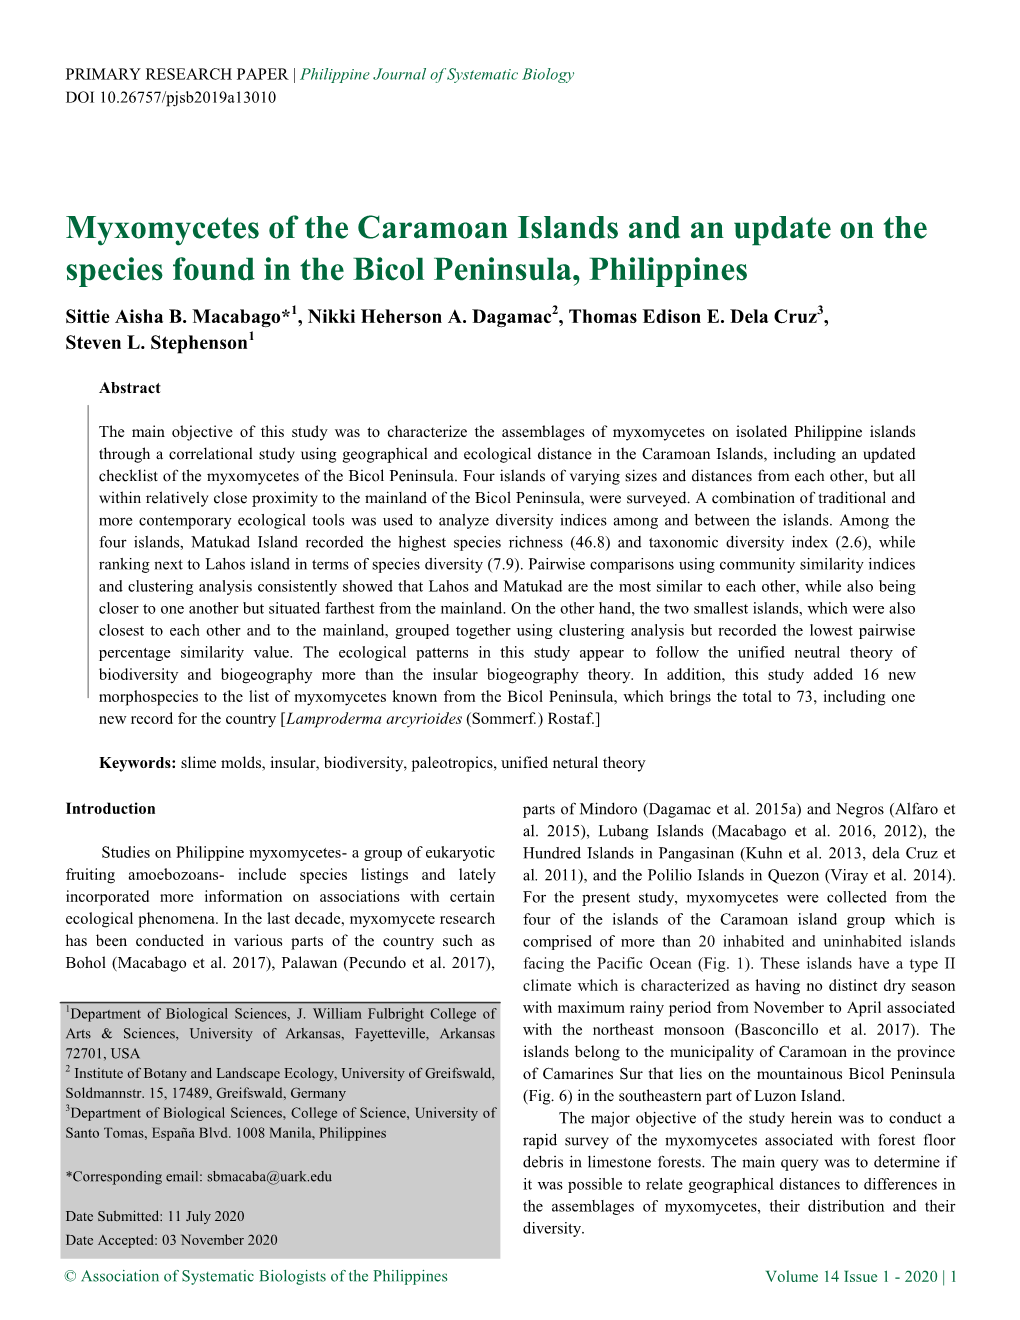 Myxomycetes of the Caramoan Islands and an Update on the Species Found in the Bicol Peninsula, Philippines